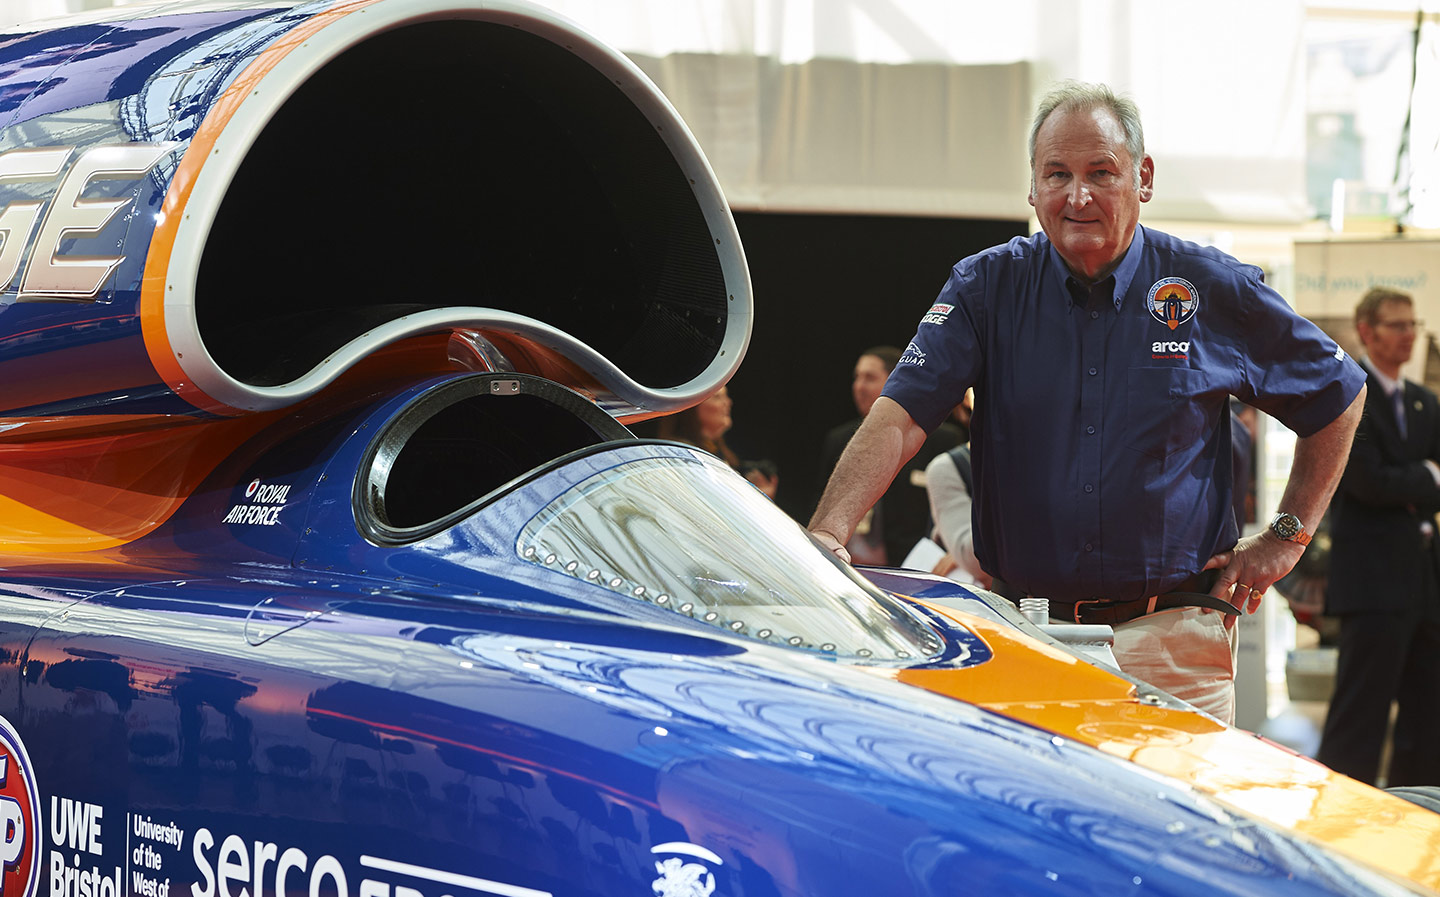 Bloodhound SSC car will make its 1,000mph land speed record attempt in autumn 2019